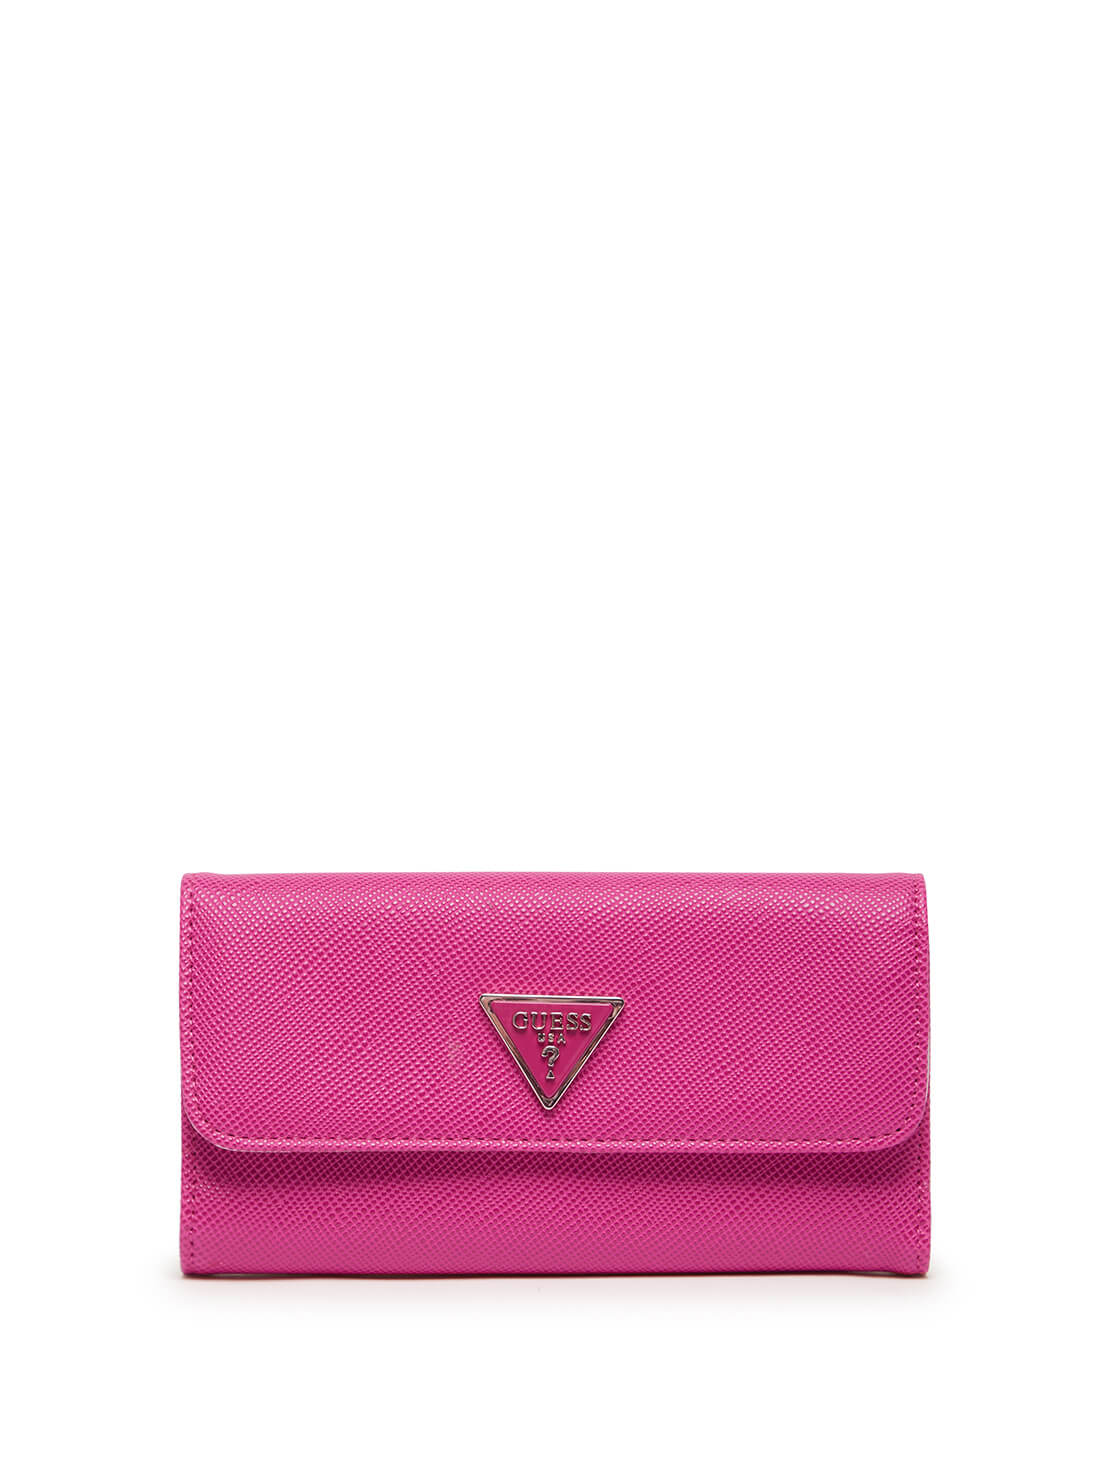 GUESS Womens  Hot Pink Noelle Multi Clutch  ZG787966 Front View